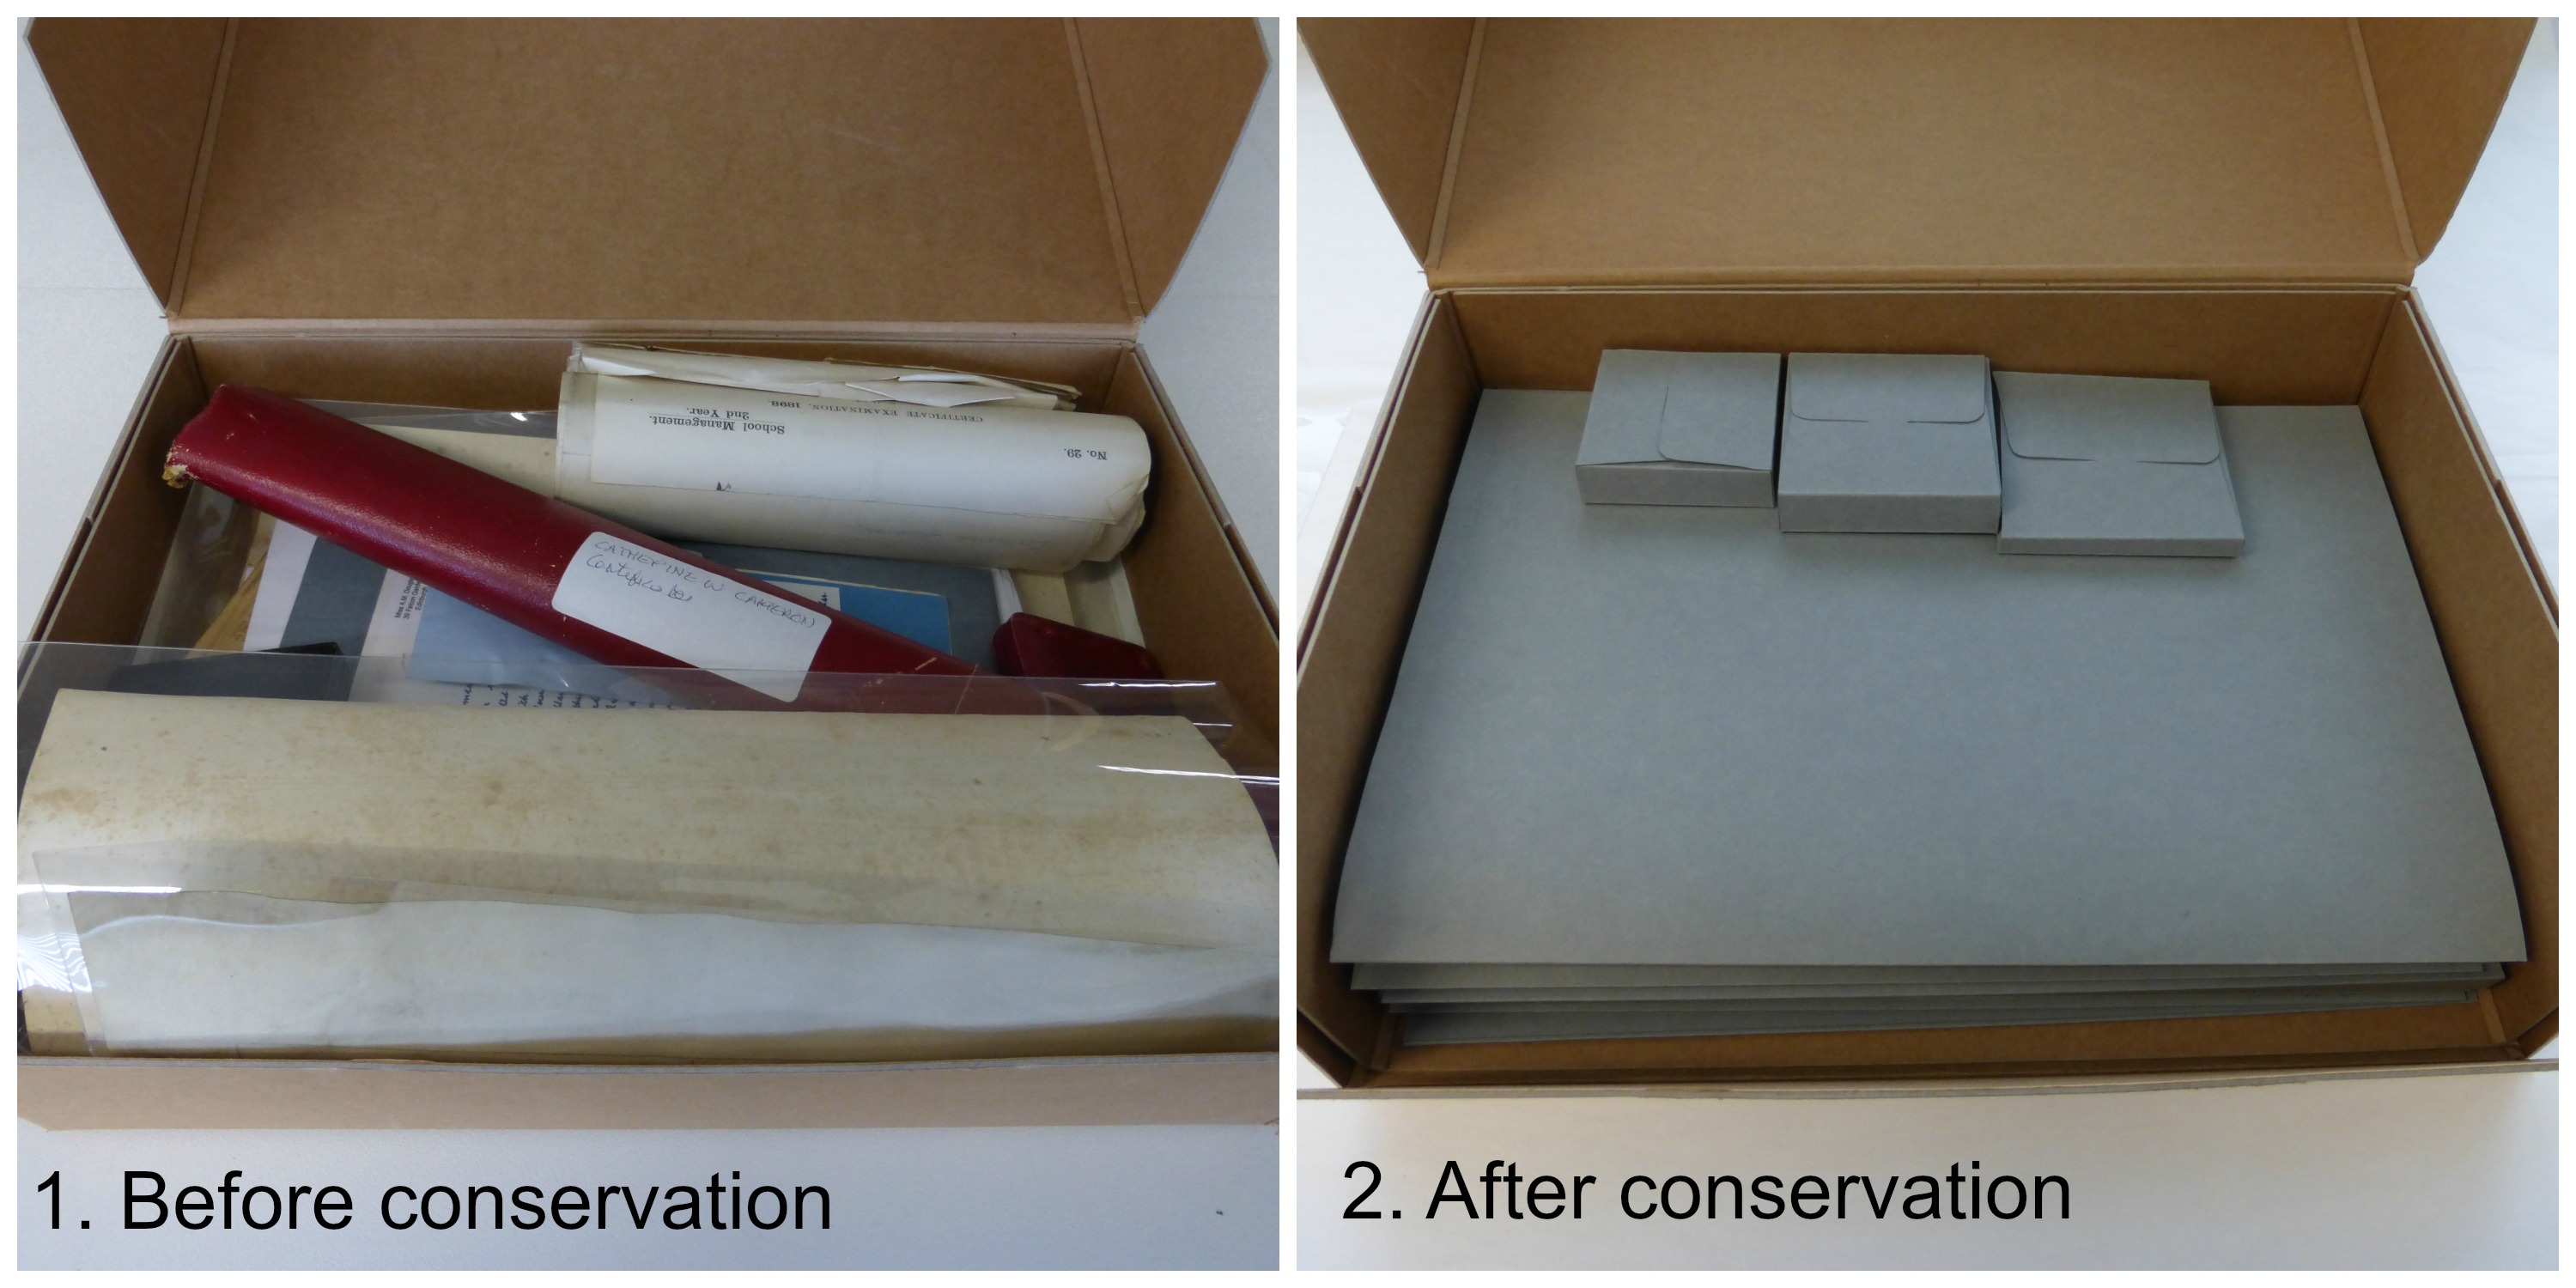 A box from the Moray House Archive, before and after conservation